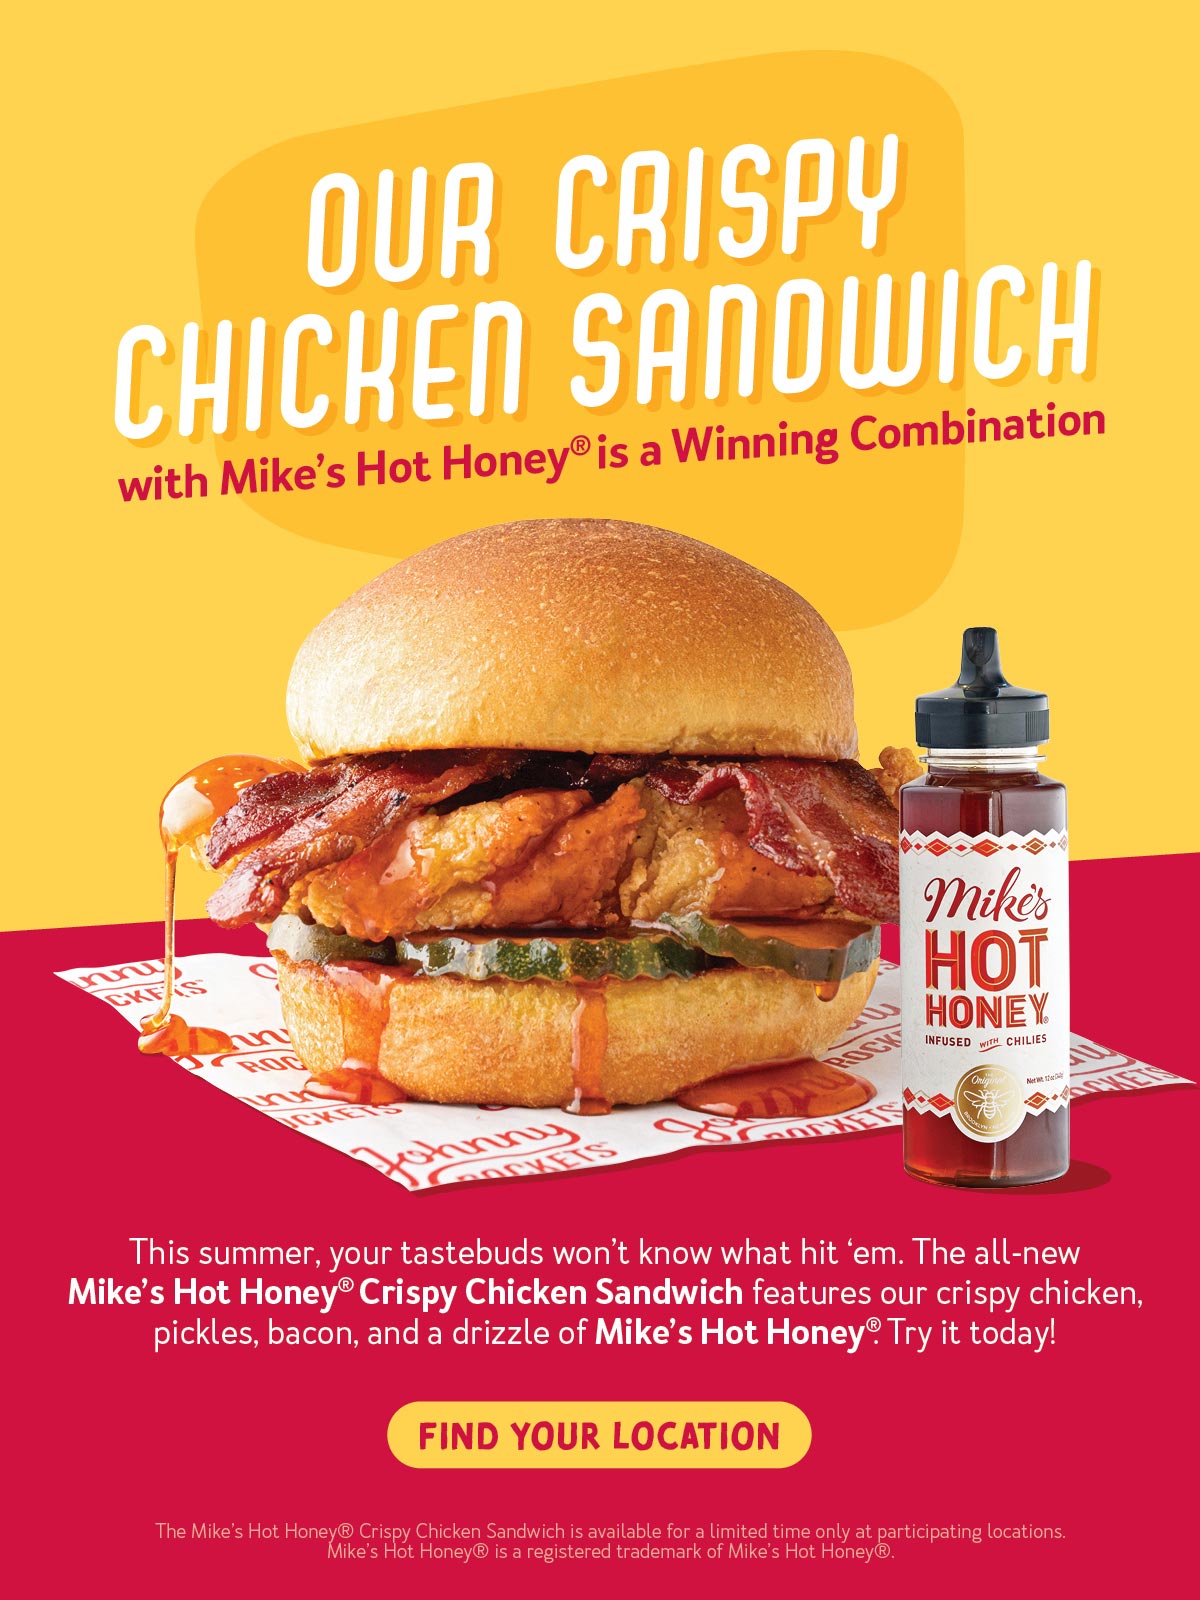 Try Our All-New Mike's Hot Honey️ Crispy Chicken Sandwich